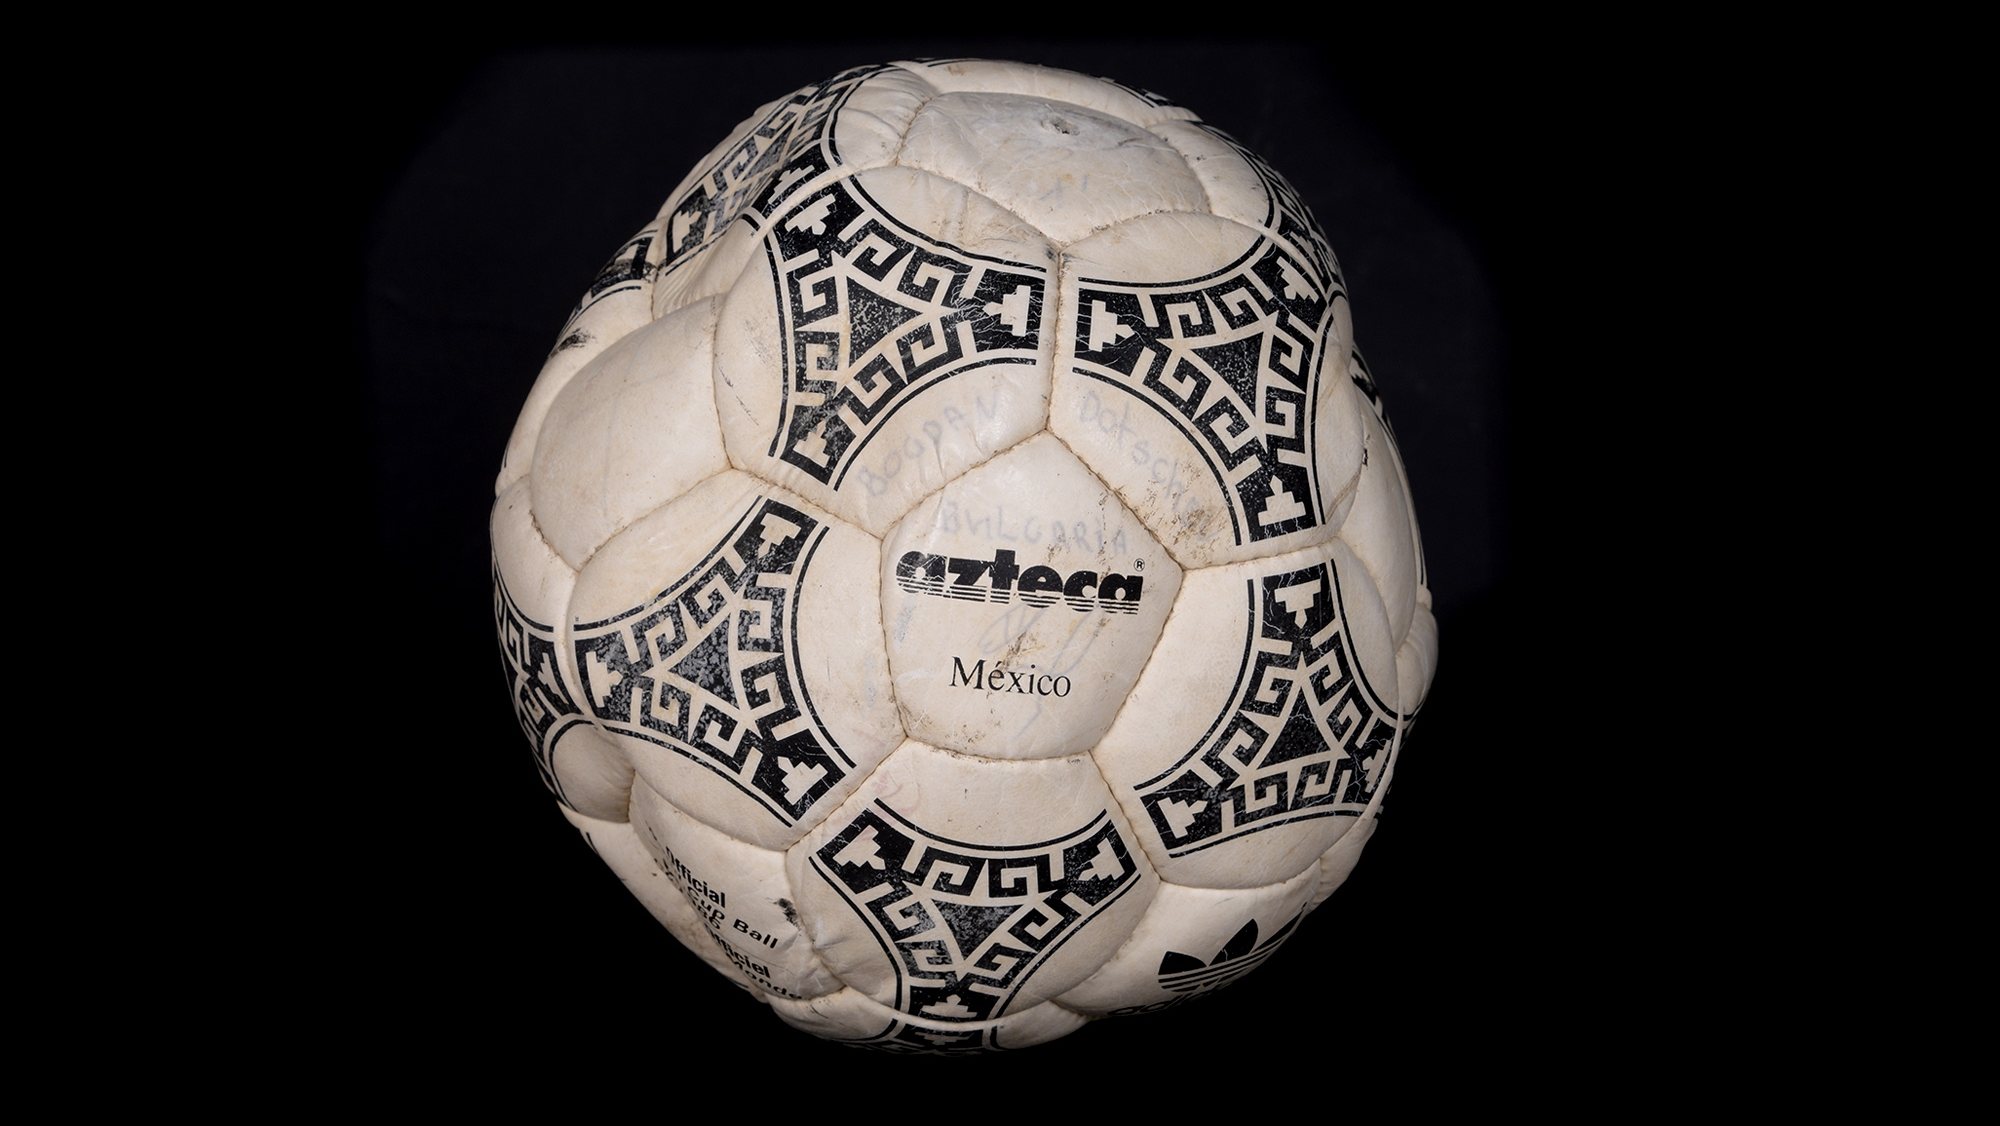 epa10243057 An undated handout photo made available by Graham Budd Auctions of the &quot;Hand of God ball&quot; in Wellingborough, Britain, 14 October 2022. The ball that was used to score one of the most controversial goals in football history is being sold by Ali Bin Nasser, the Tunisian referee who allowed the goal by Maradona in the FIFA 1986 World Cup quarter finals between Argentina and Argentina. The auction will take place on the 16 November 2022.  EPA/GRAHAM BUDD AUCTIONS HANDOUT MANDATORY CREDIT GRAHAM BUDD AUCTIONS HANDOUT HANDOUT EDITORIAL USE ONLY/NO SALES